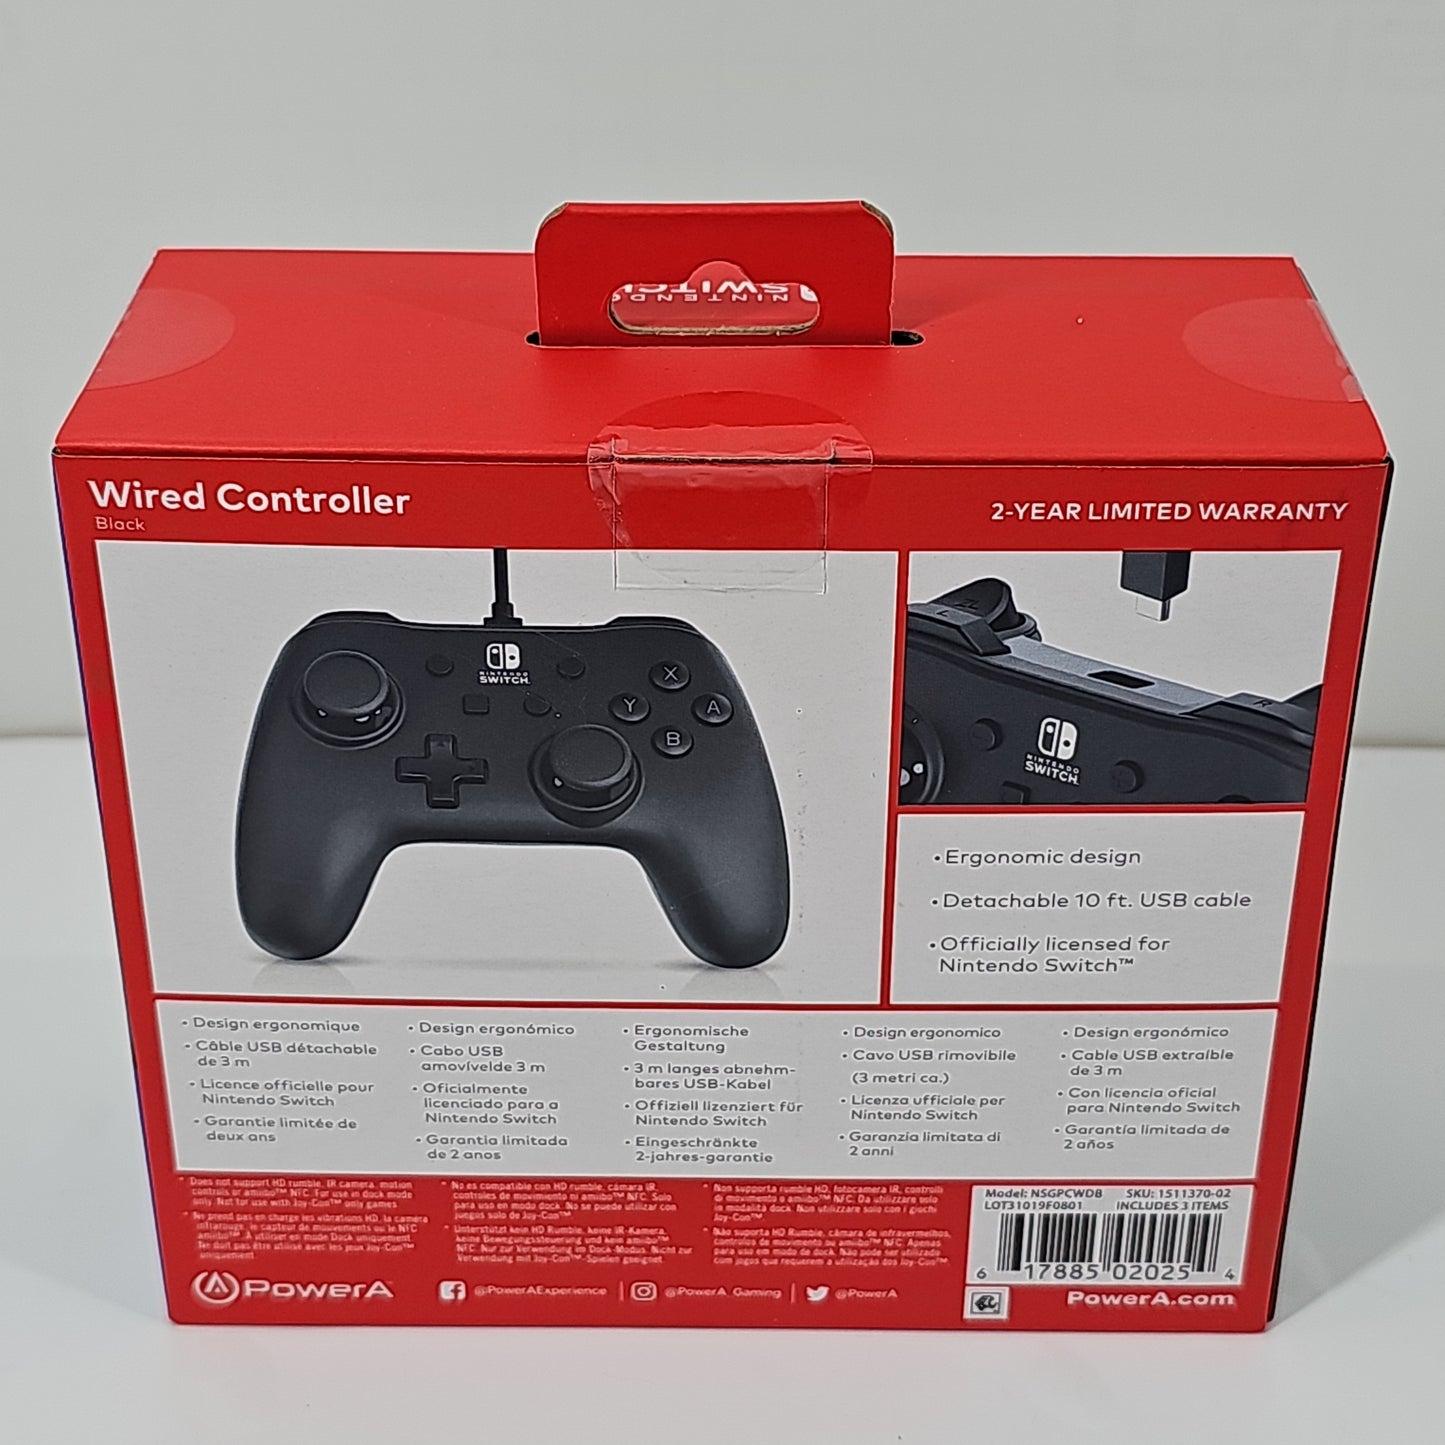 New PowerA Wired Controller For Nintendo Switch Black MSGPCWDB